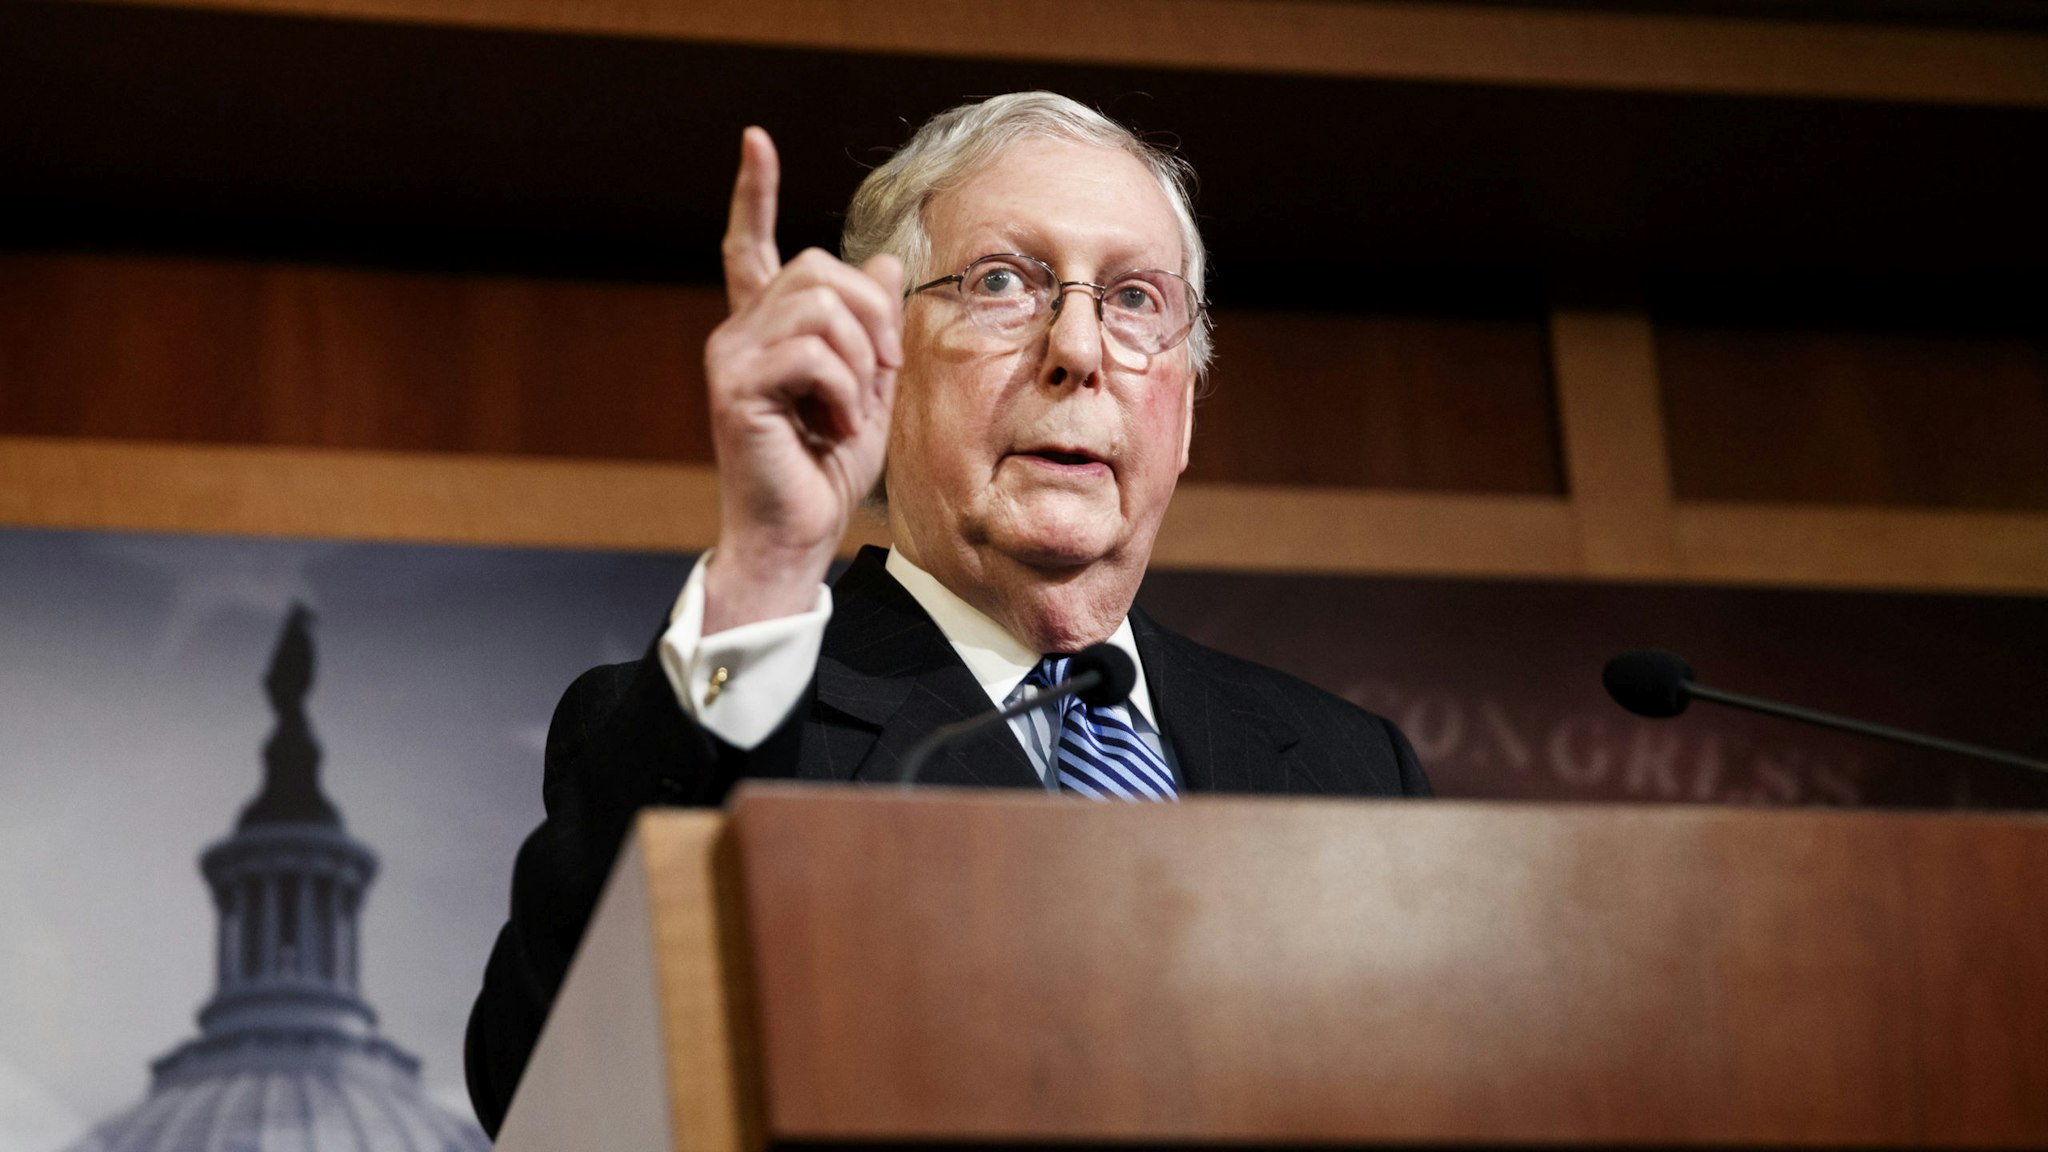 WASHINGTON D.C., Feb. 5, 2020 -- U.S. Senate Majority Leader Mitch McConnell speaks during a press conference following a vote in the U.S. Senate to acquit President Donald Trump on impeachment on Capitol Hill in Washington D.C., the United States, Feb. 5, 2020. U.S. President Donald Trump was acquitted on Wednesday afternoon by the Senate after the chamber voted down both articles of impeachment against him that the House approved late last year.